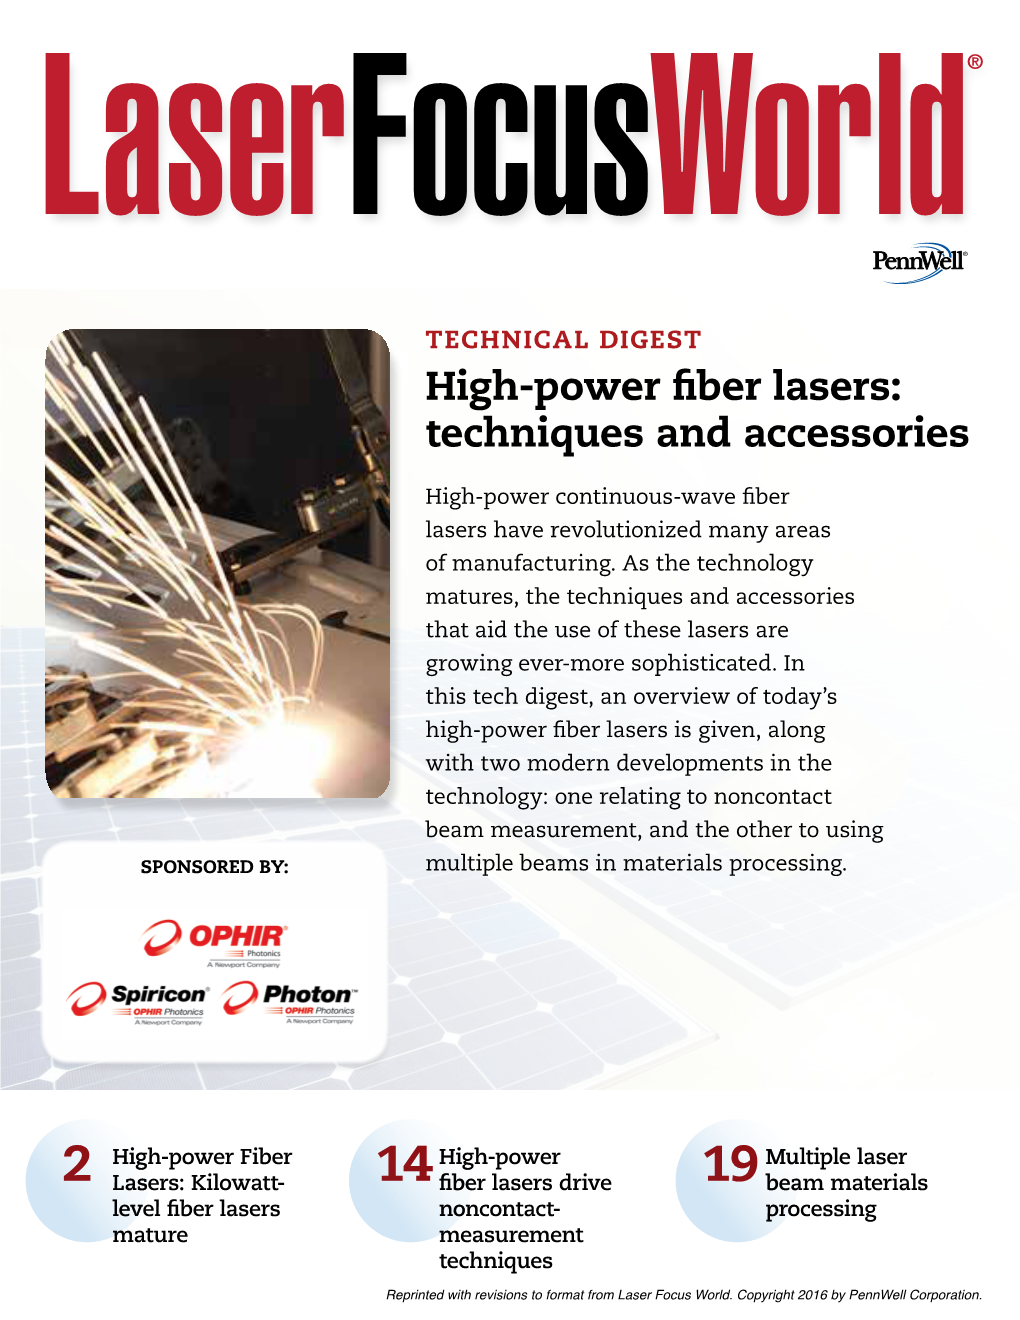 High-Power Fiber Lasers: Techniques and Accessories